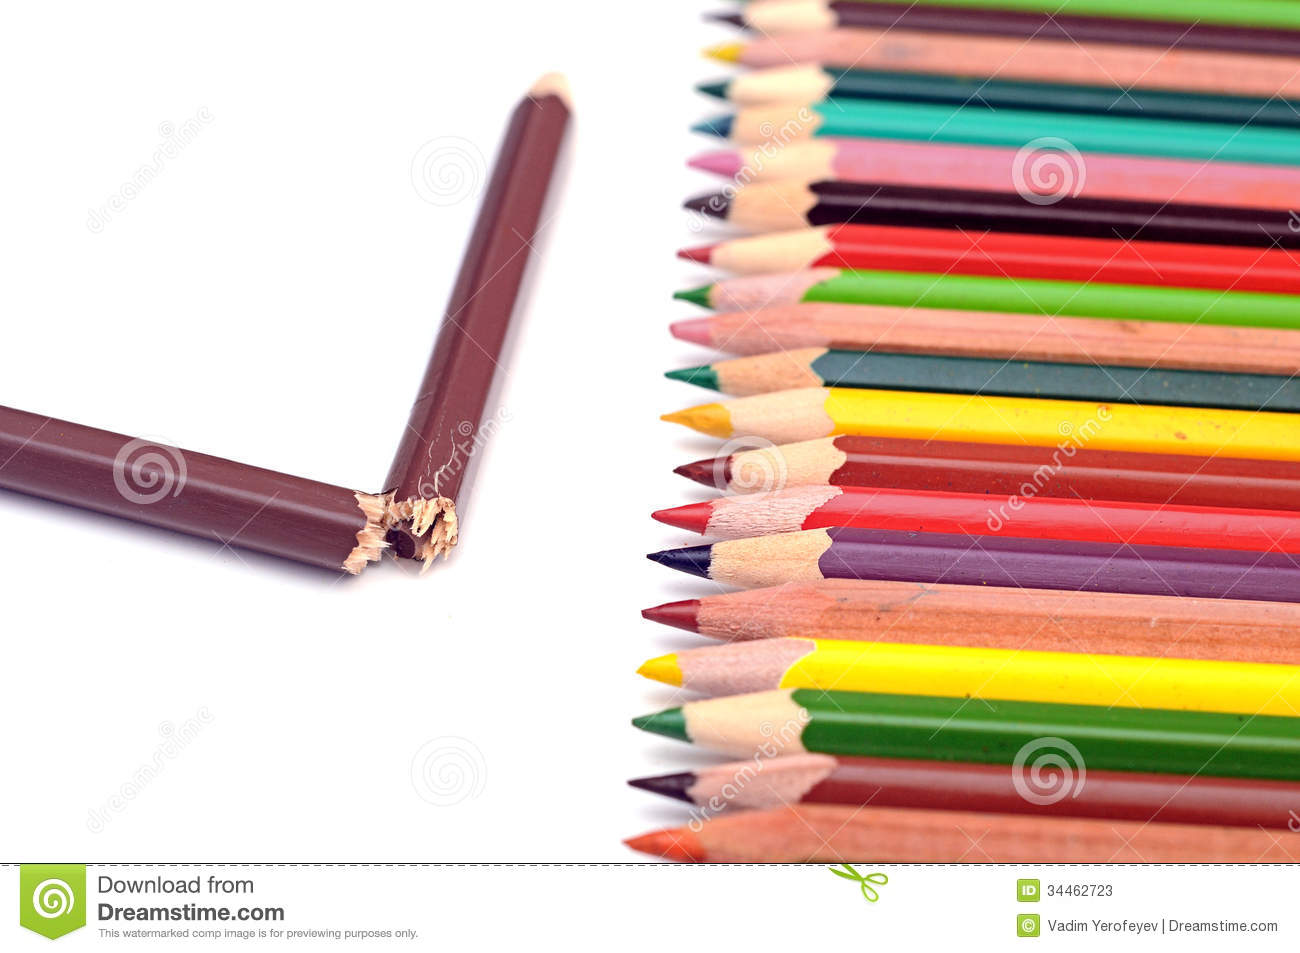 Colorful Pencils And One Broken